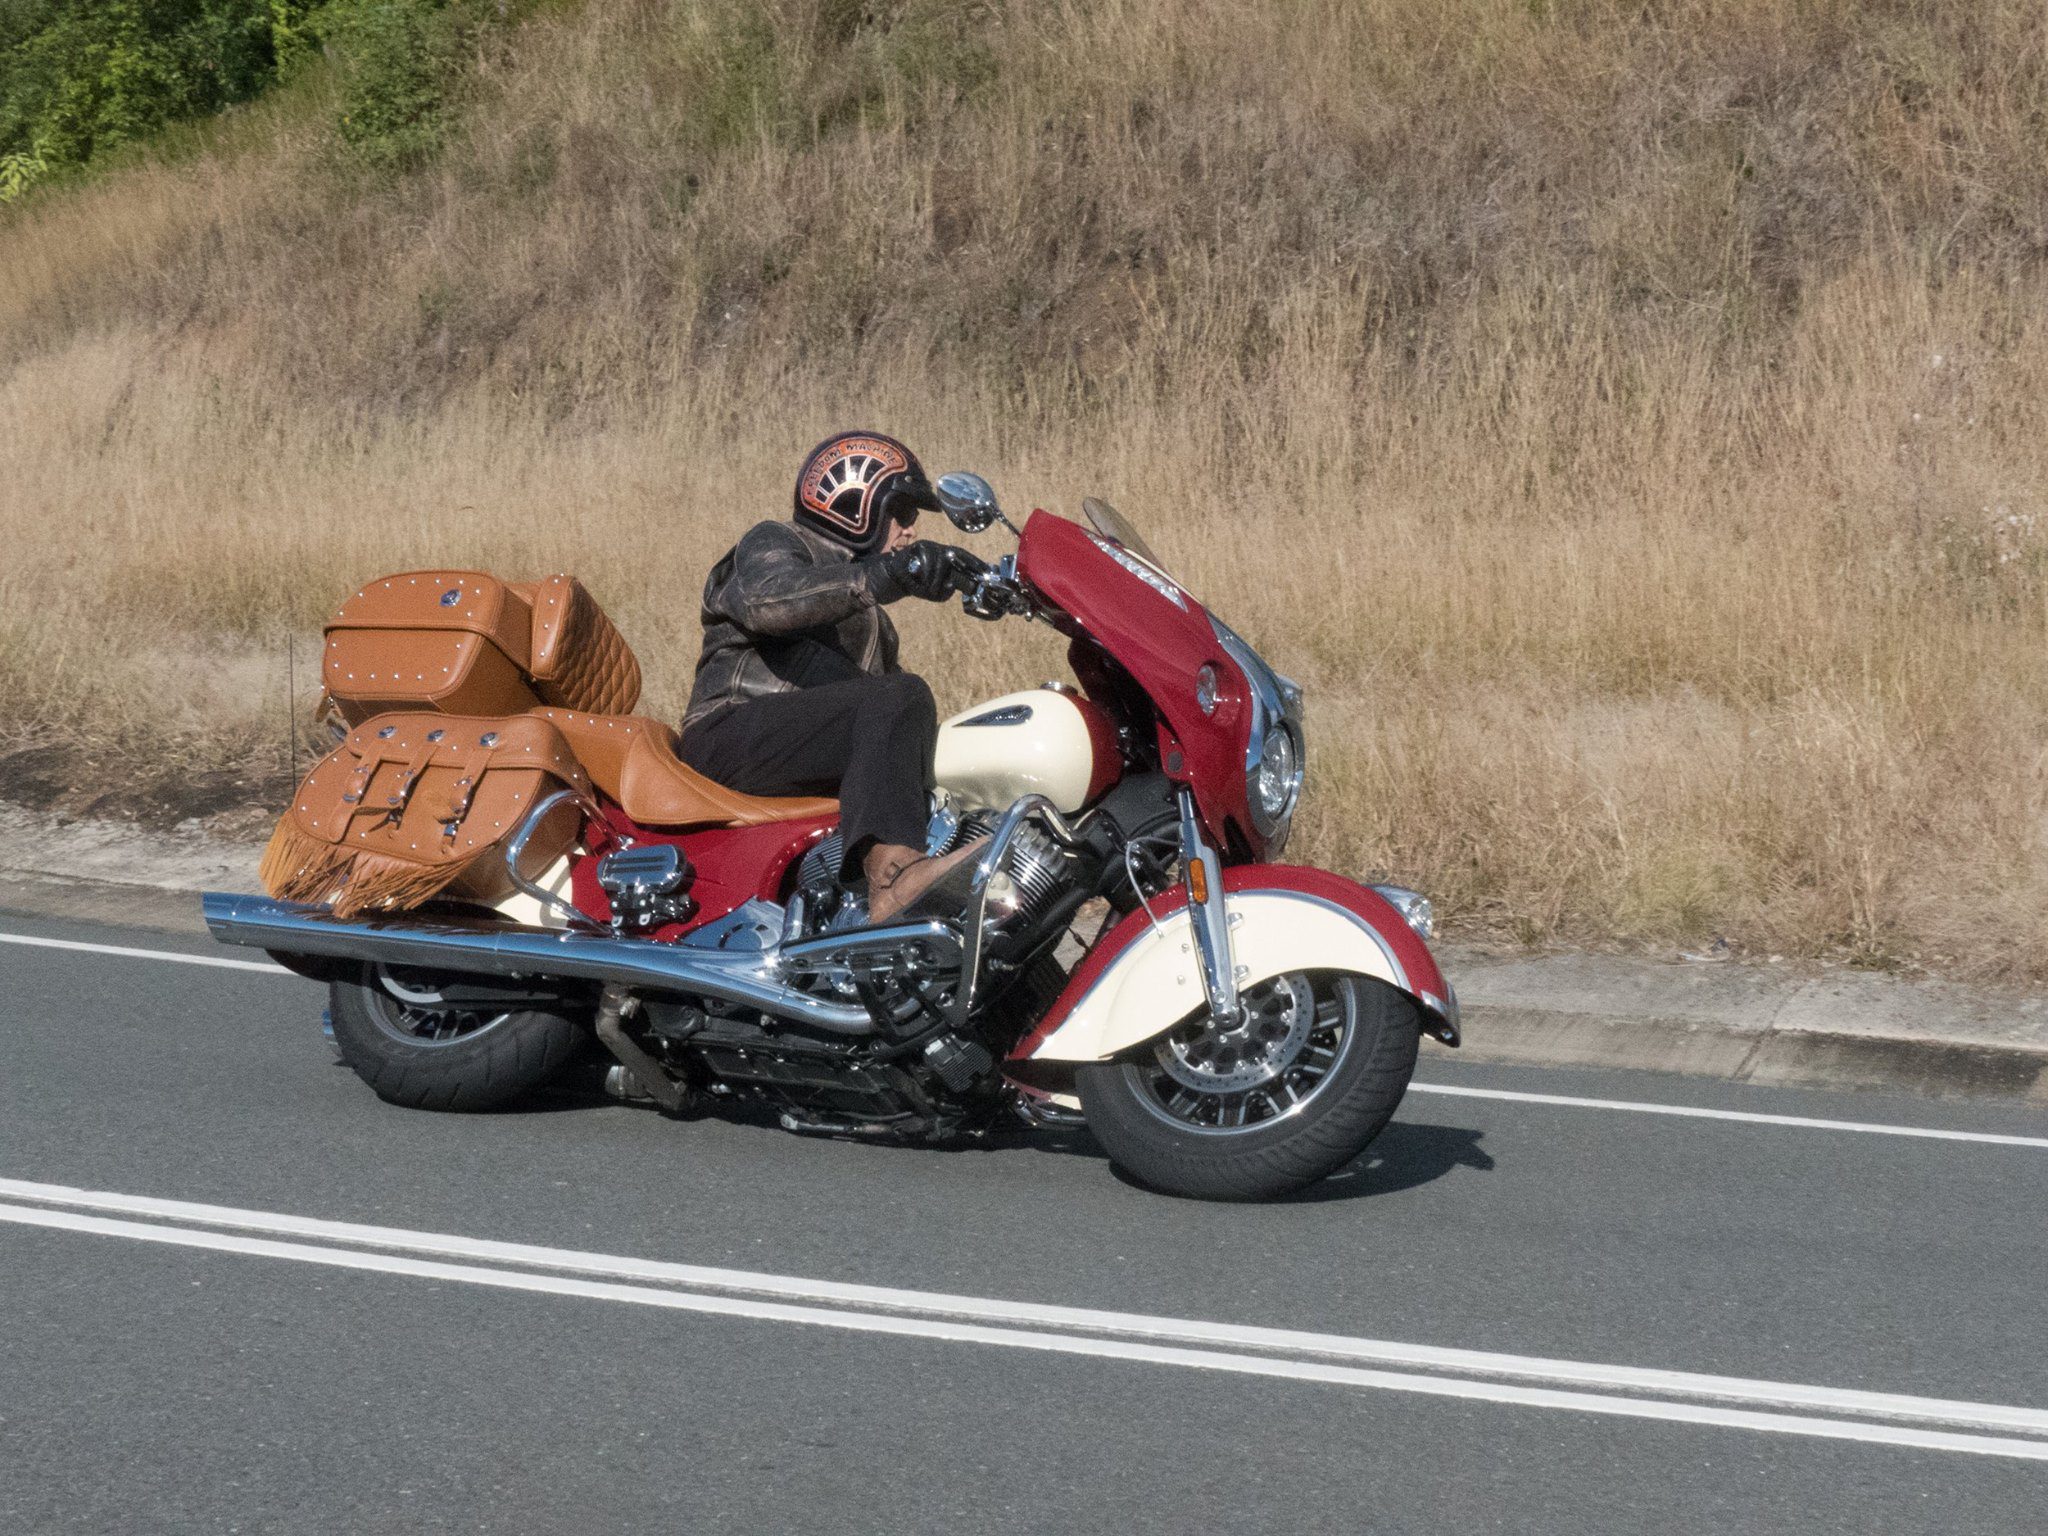 Indian Roadmaster Classic on the Oxley highway wiring issue